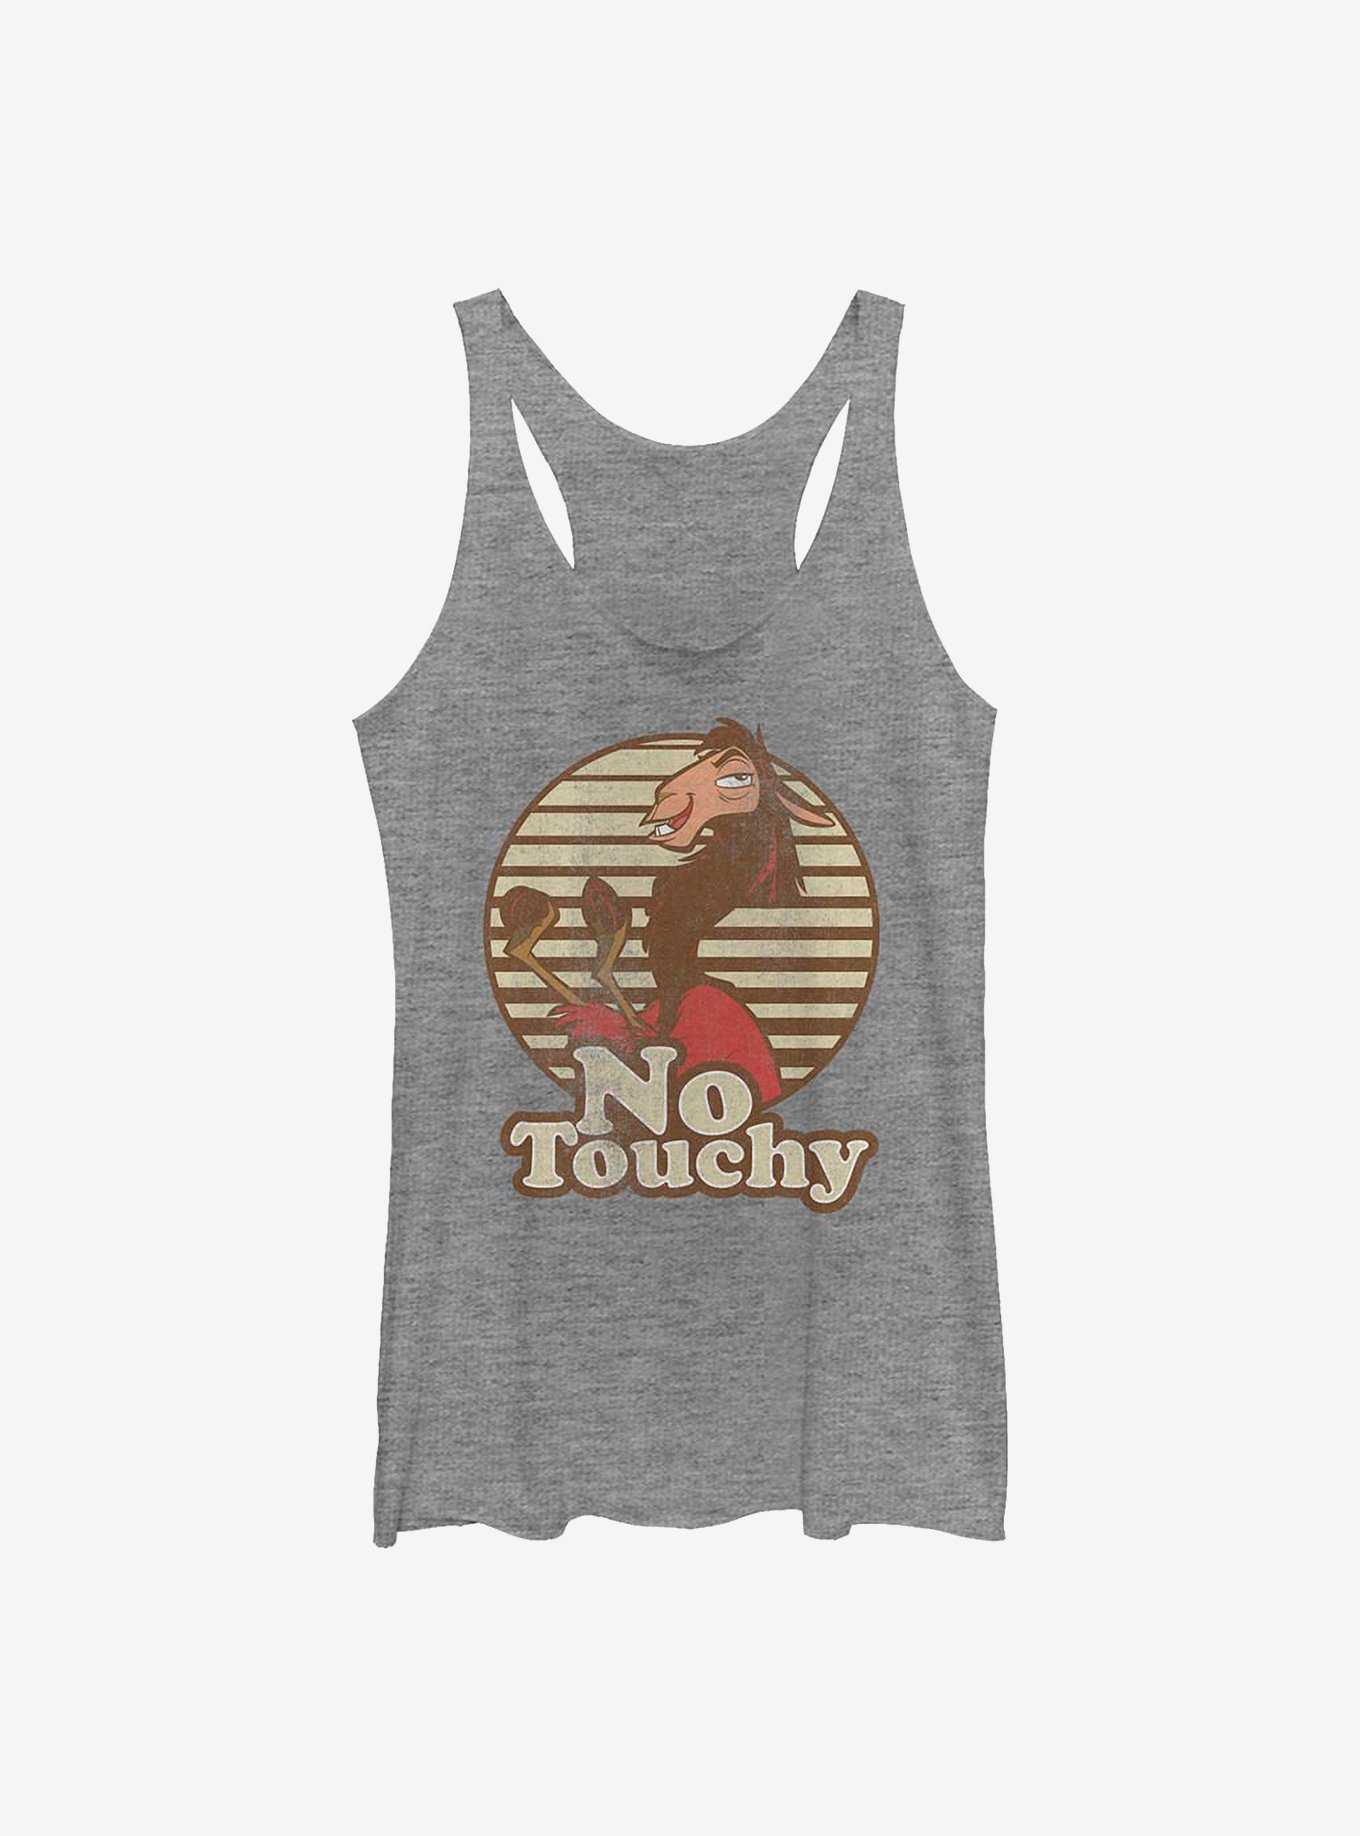 Disney The Emperor's New Groove No Touchy Womens Tank Top, , hi-res